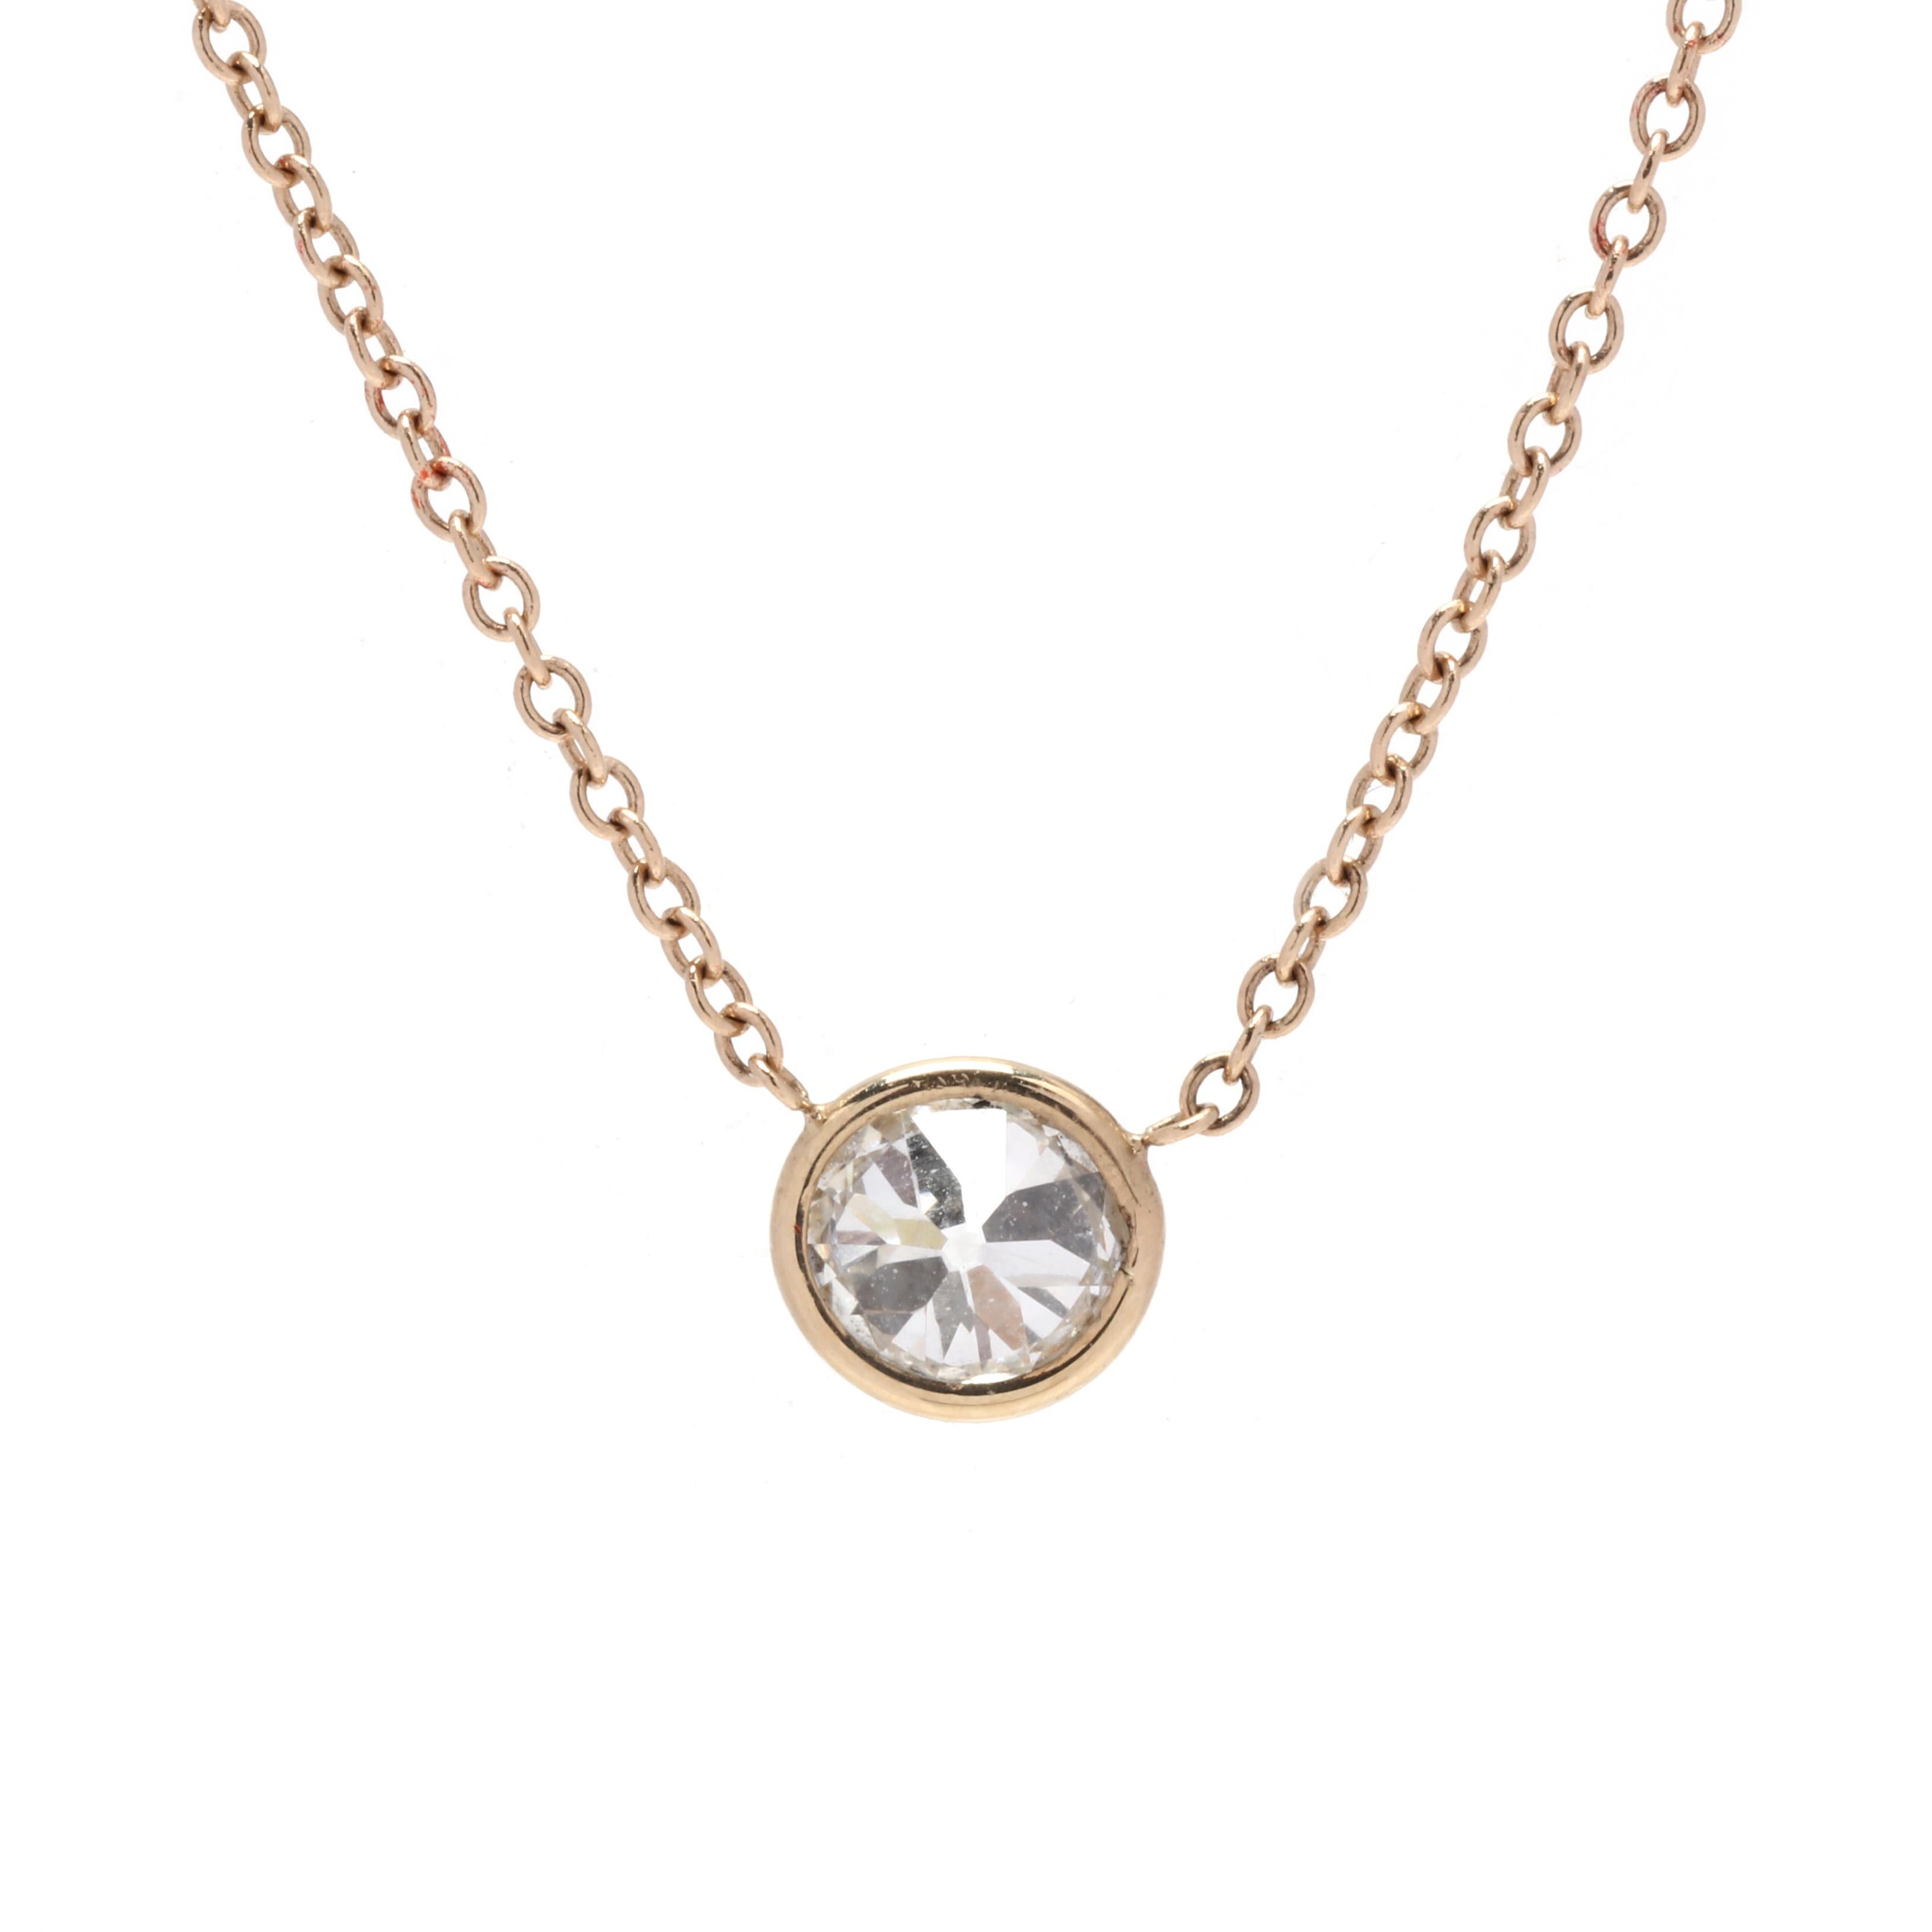 A 14 karat yellow gold stationary diamond bezel pendant necklace. This necklace features a bezel set old mine cut diamond weighing approximately .44 carat suspended from a thin cable chain with a lobster clasp.

Stone:

- diamond, 1 stone

- old